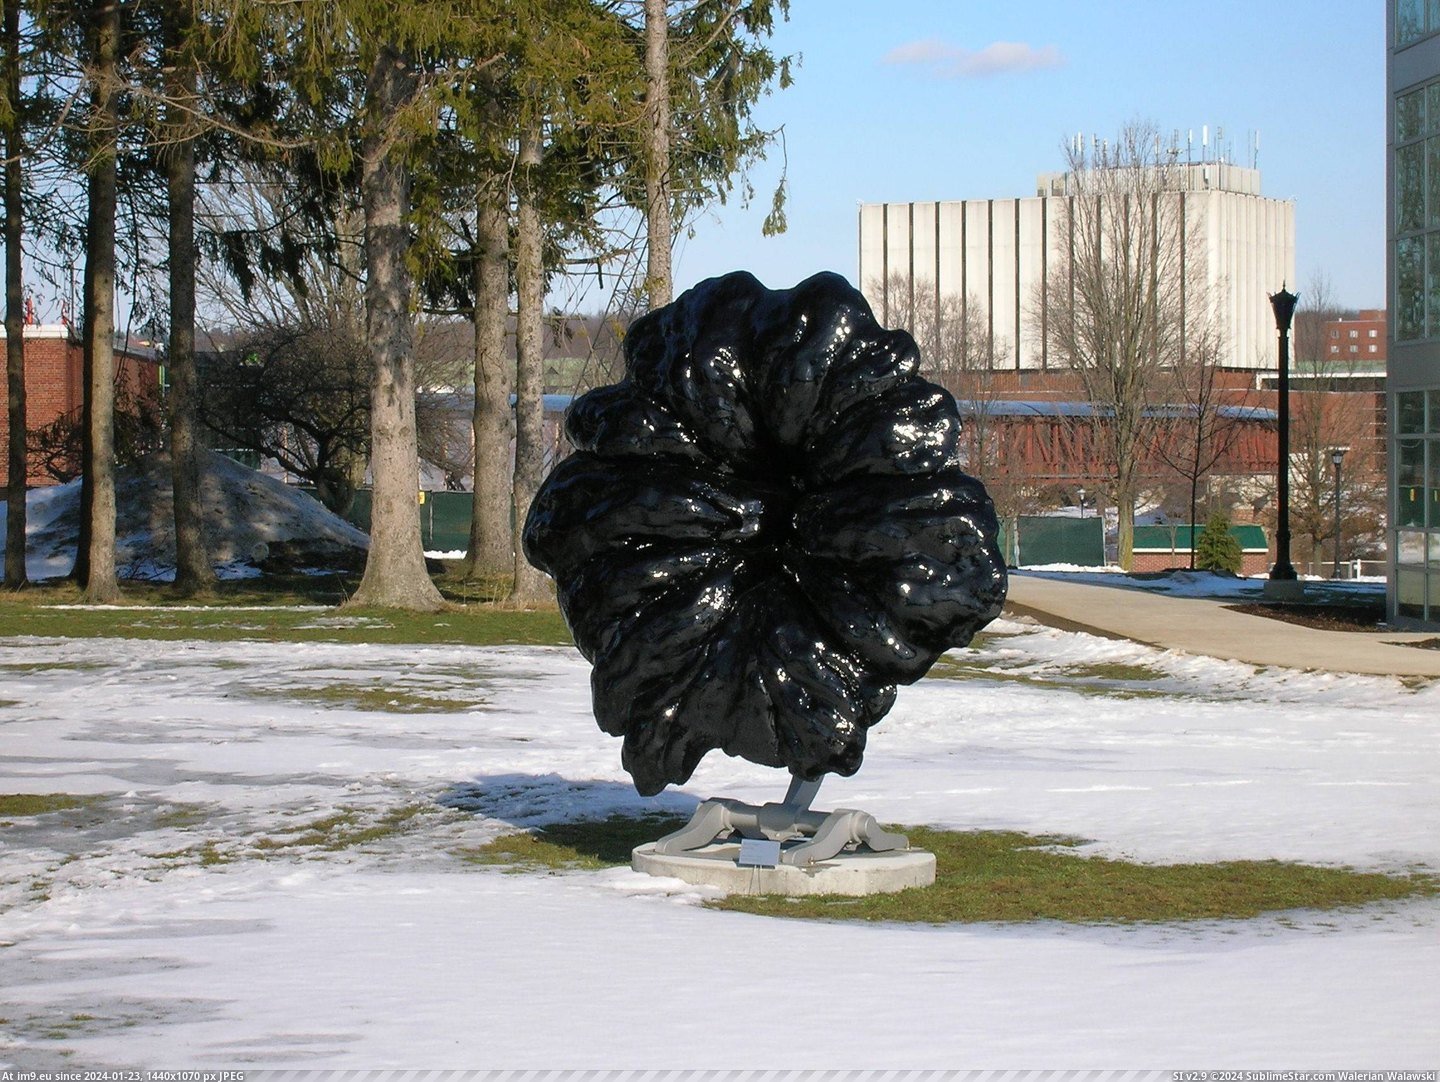 #Wtf #Art #Flower #Statue #Exhibits #Tha #Edinboro #Student #University #Showed [Wtf] A student at Edinboro University made this 'flower' statue and showed it in art exhibits. He later came forth and said tha Pic. (Bild von album My r/WTF favs))